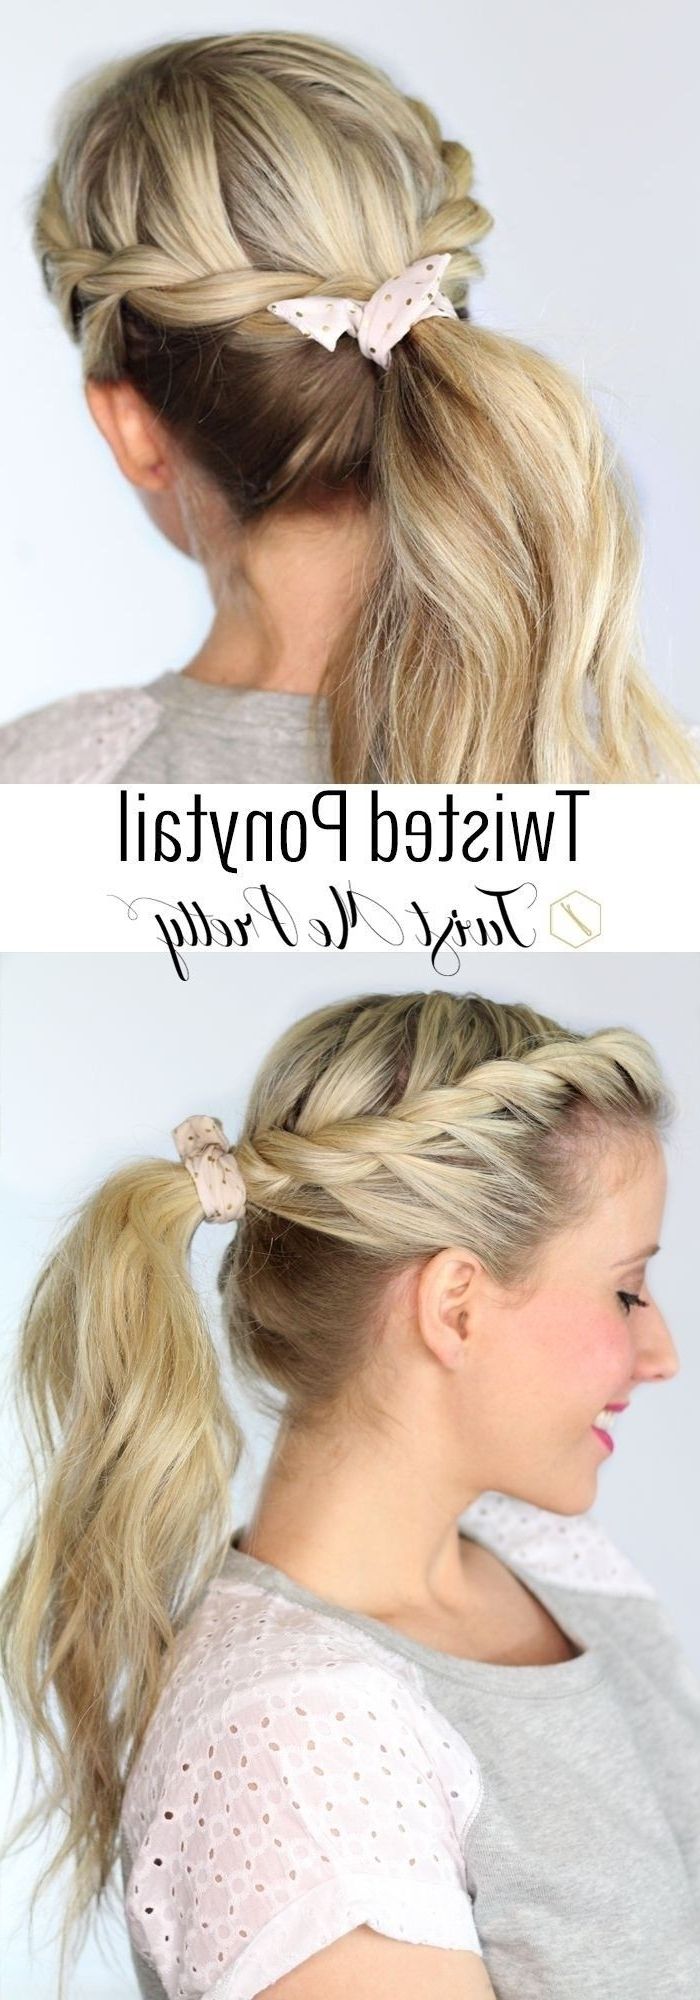 Best And Newest Chic High Ponytail Hairstyles With A Twist Intended For 22 Great Ponytail Hairstyles For Girls – Pretty Designs (View 5 of 20)